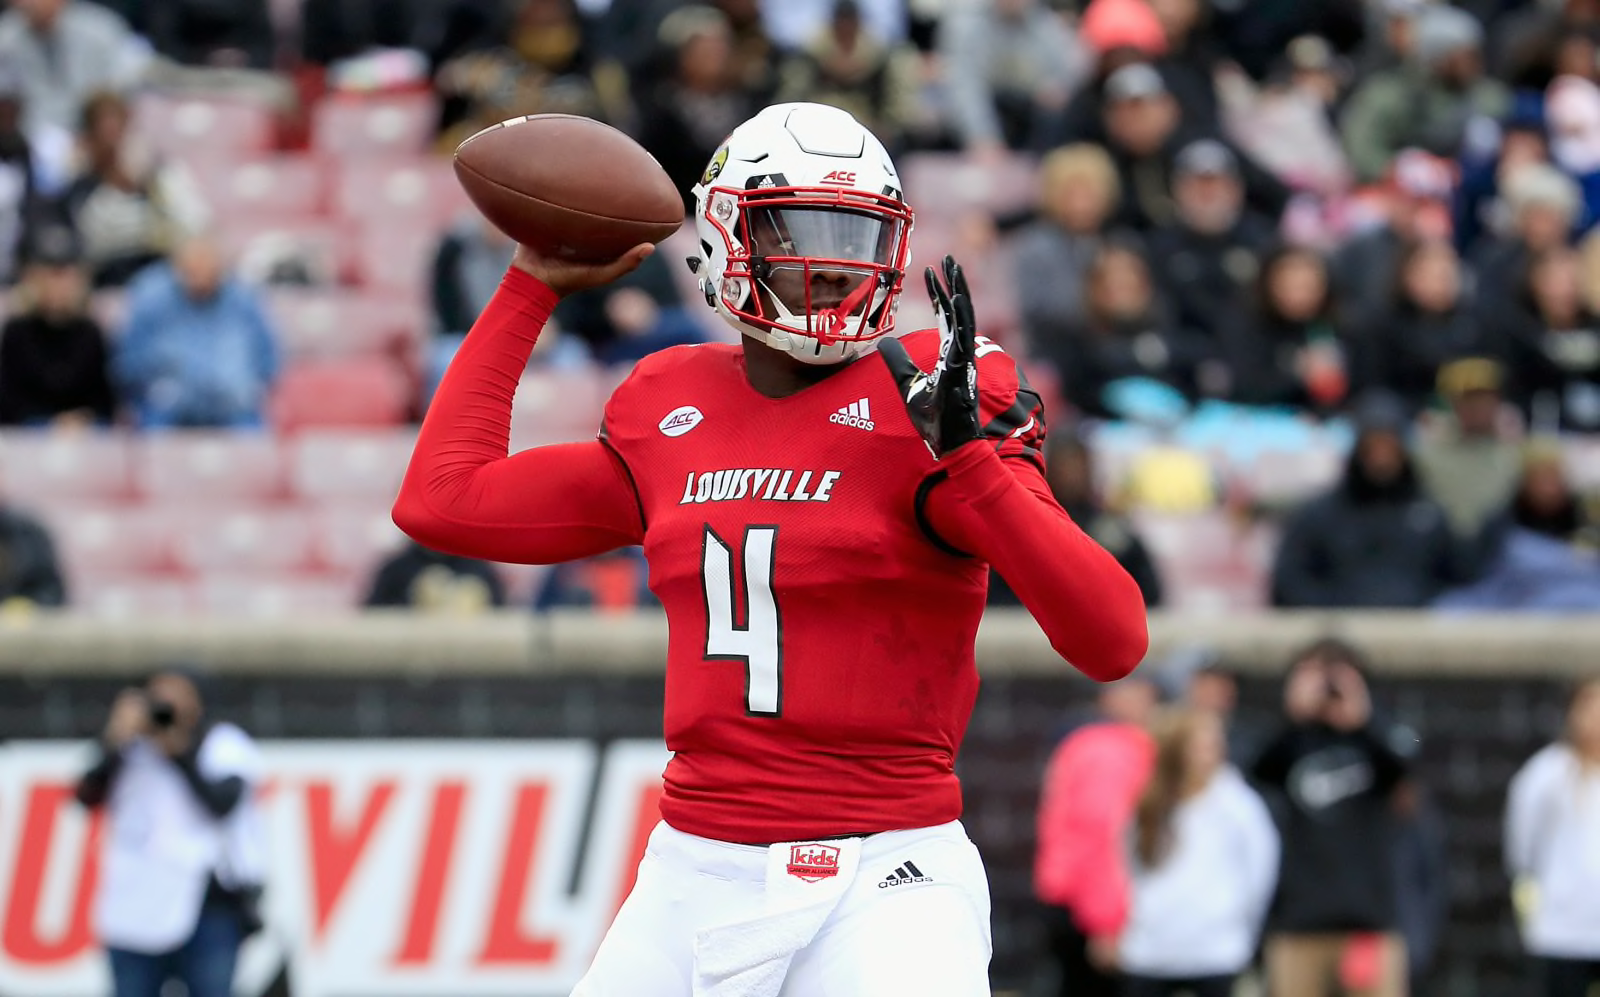 Louisville football 2019 depth chart preview: Quarterback - Page 2